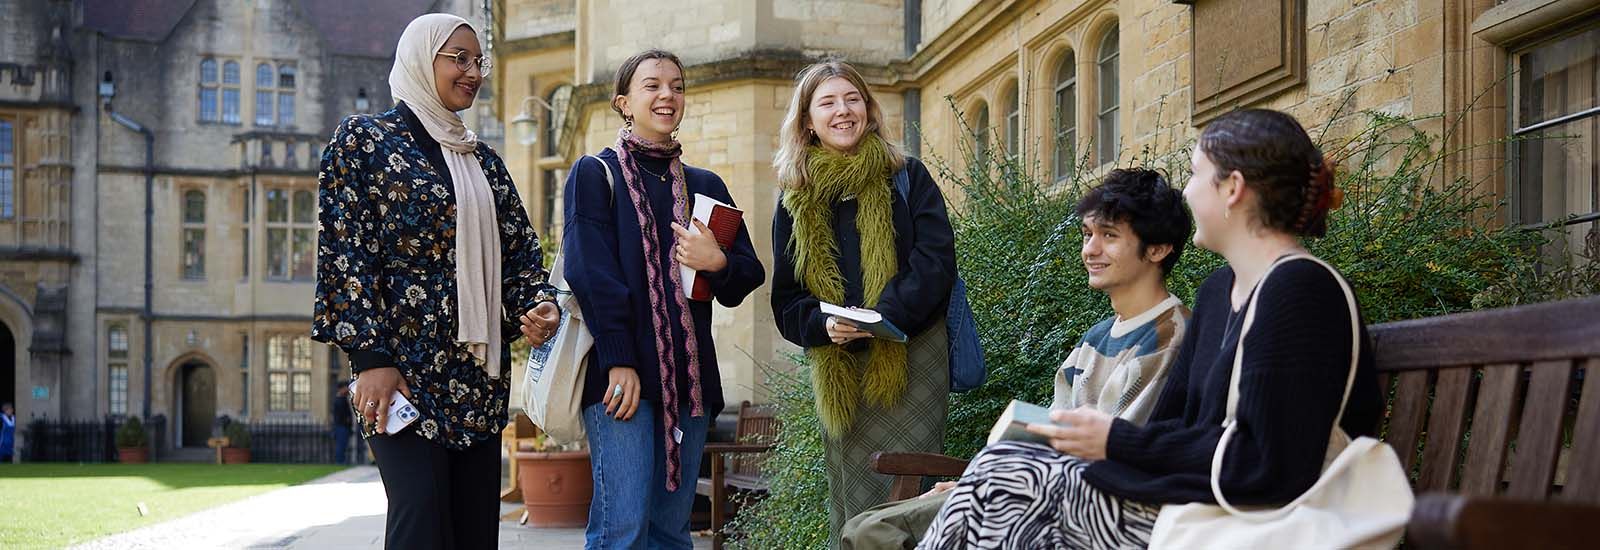 Photograph of a group of Oxford students gathered outside in the courtyard of Brasenose College